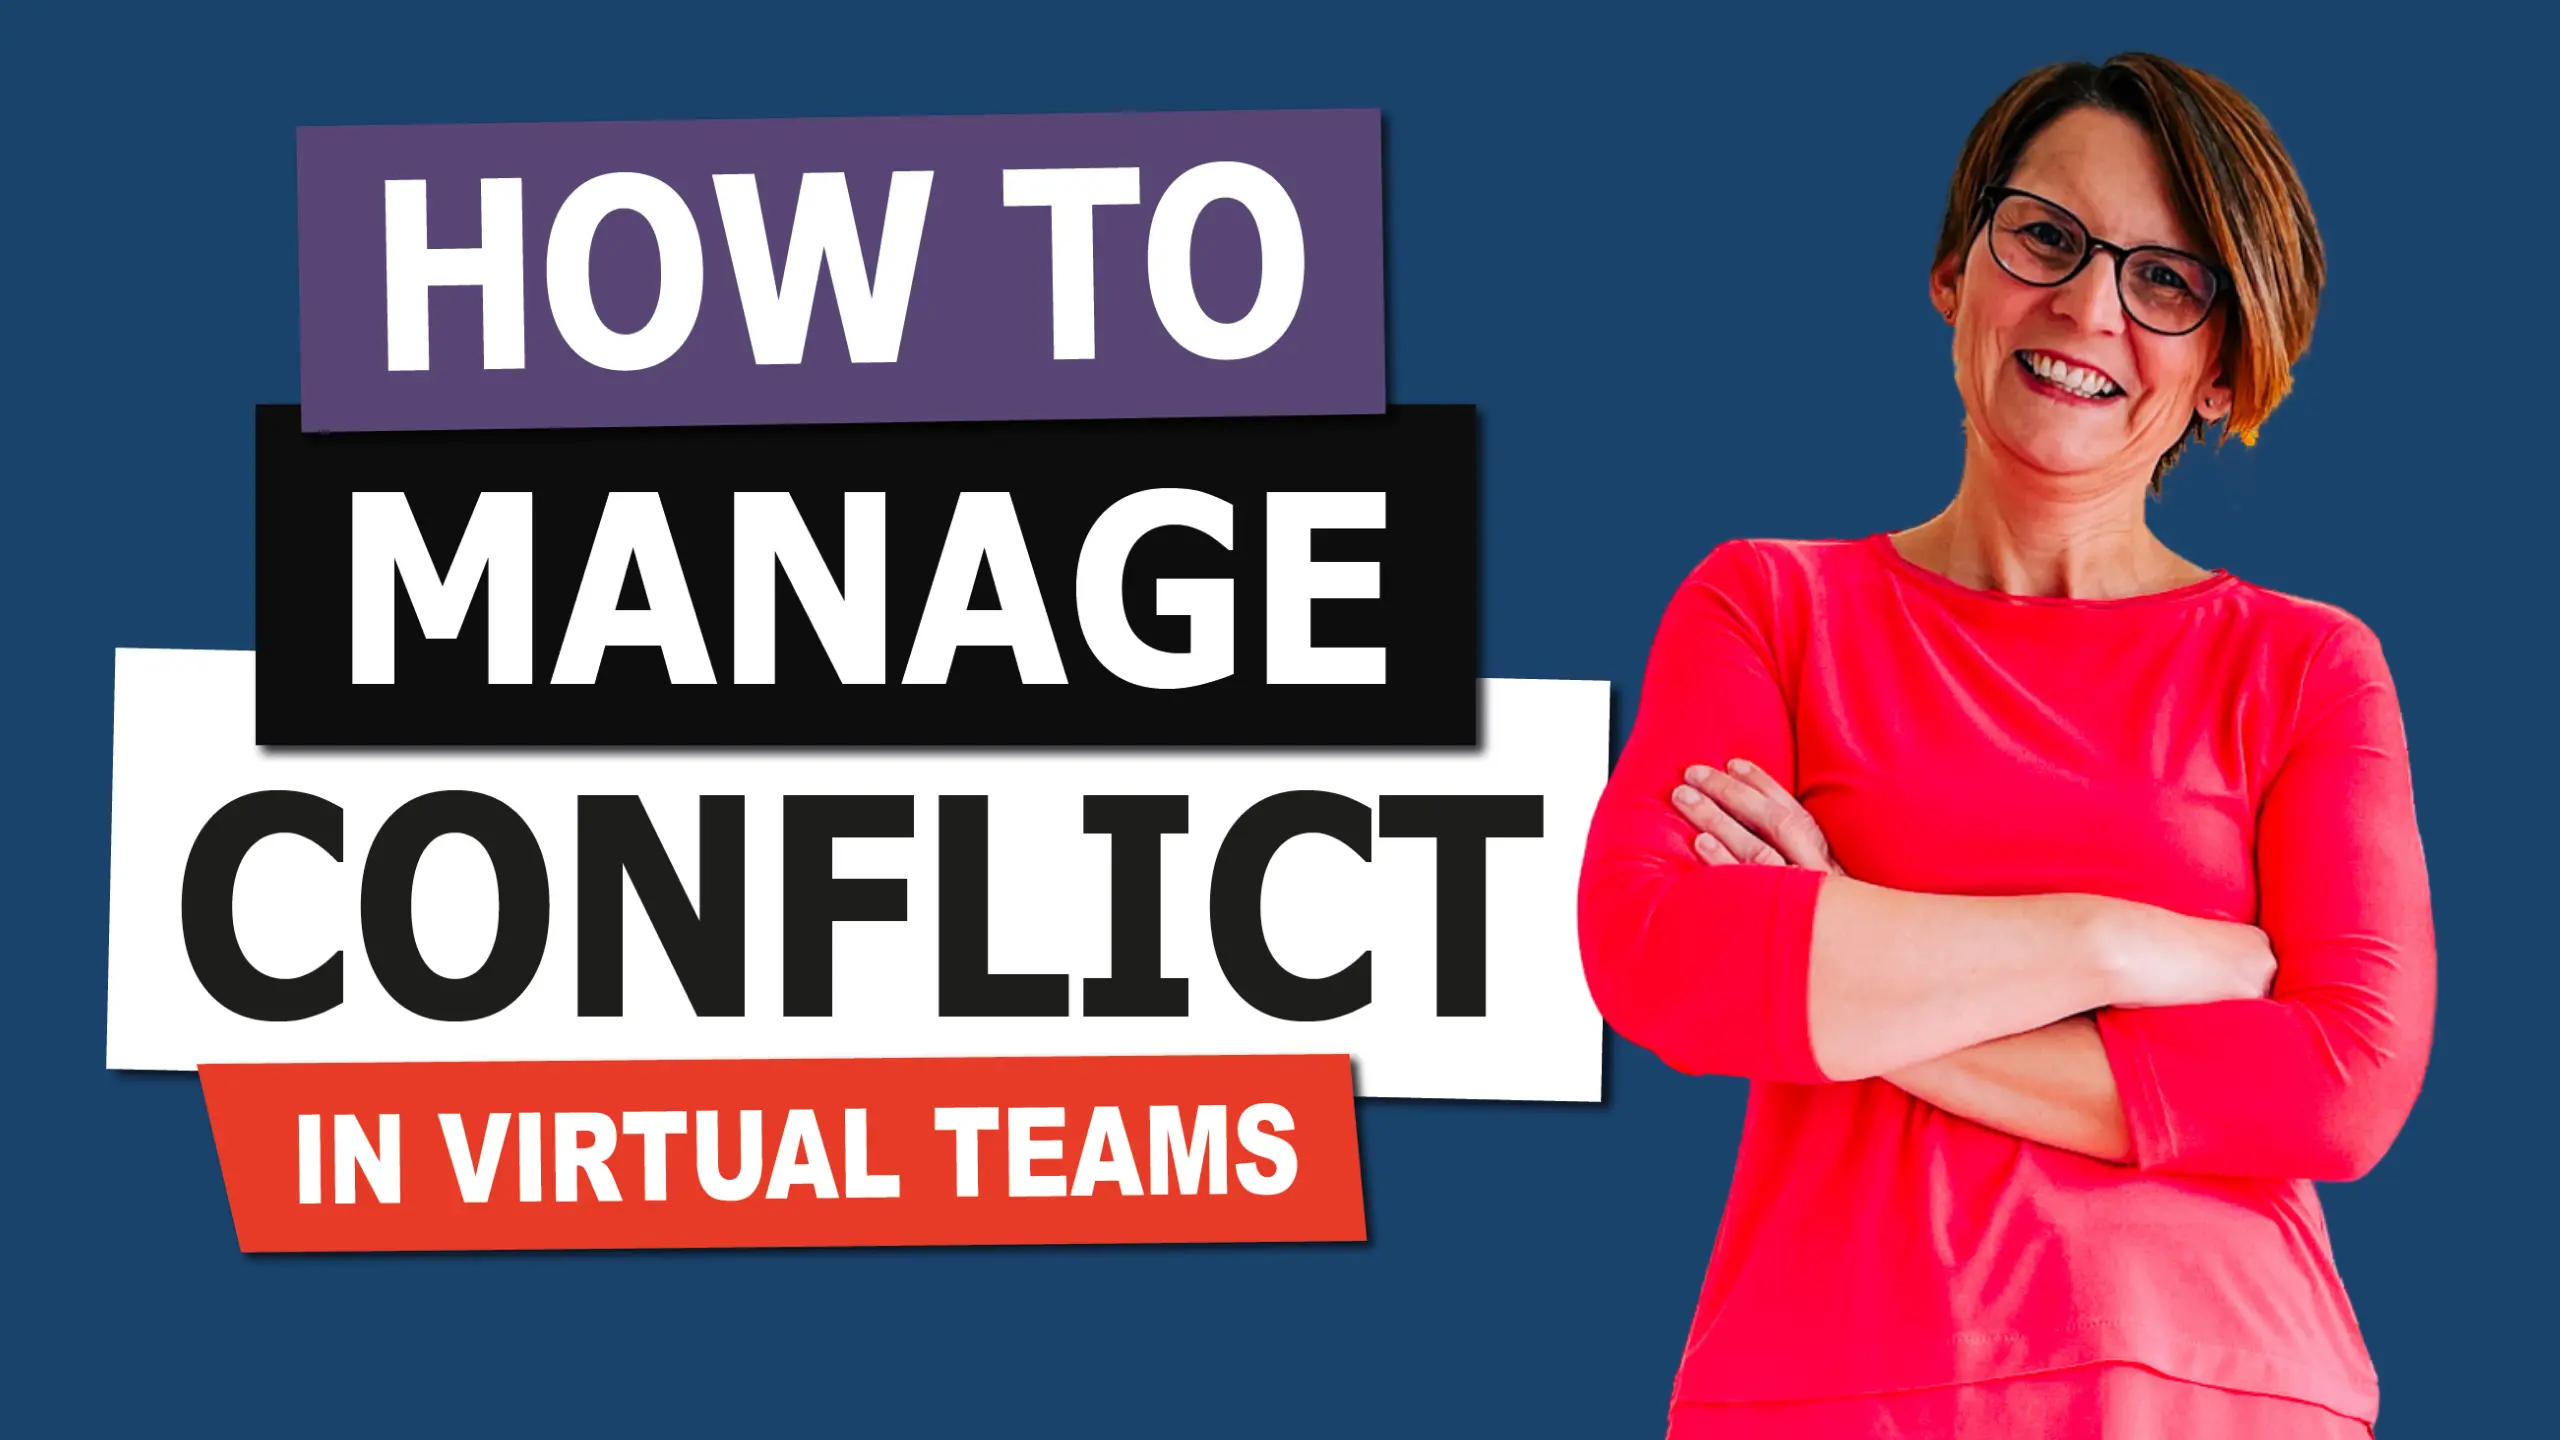 How To Manage Conflict In Virtual Teams